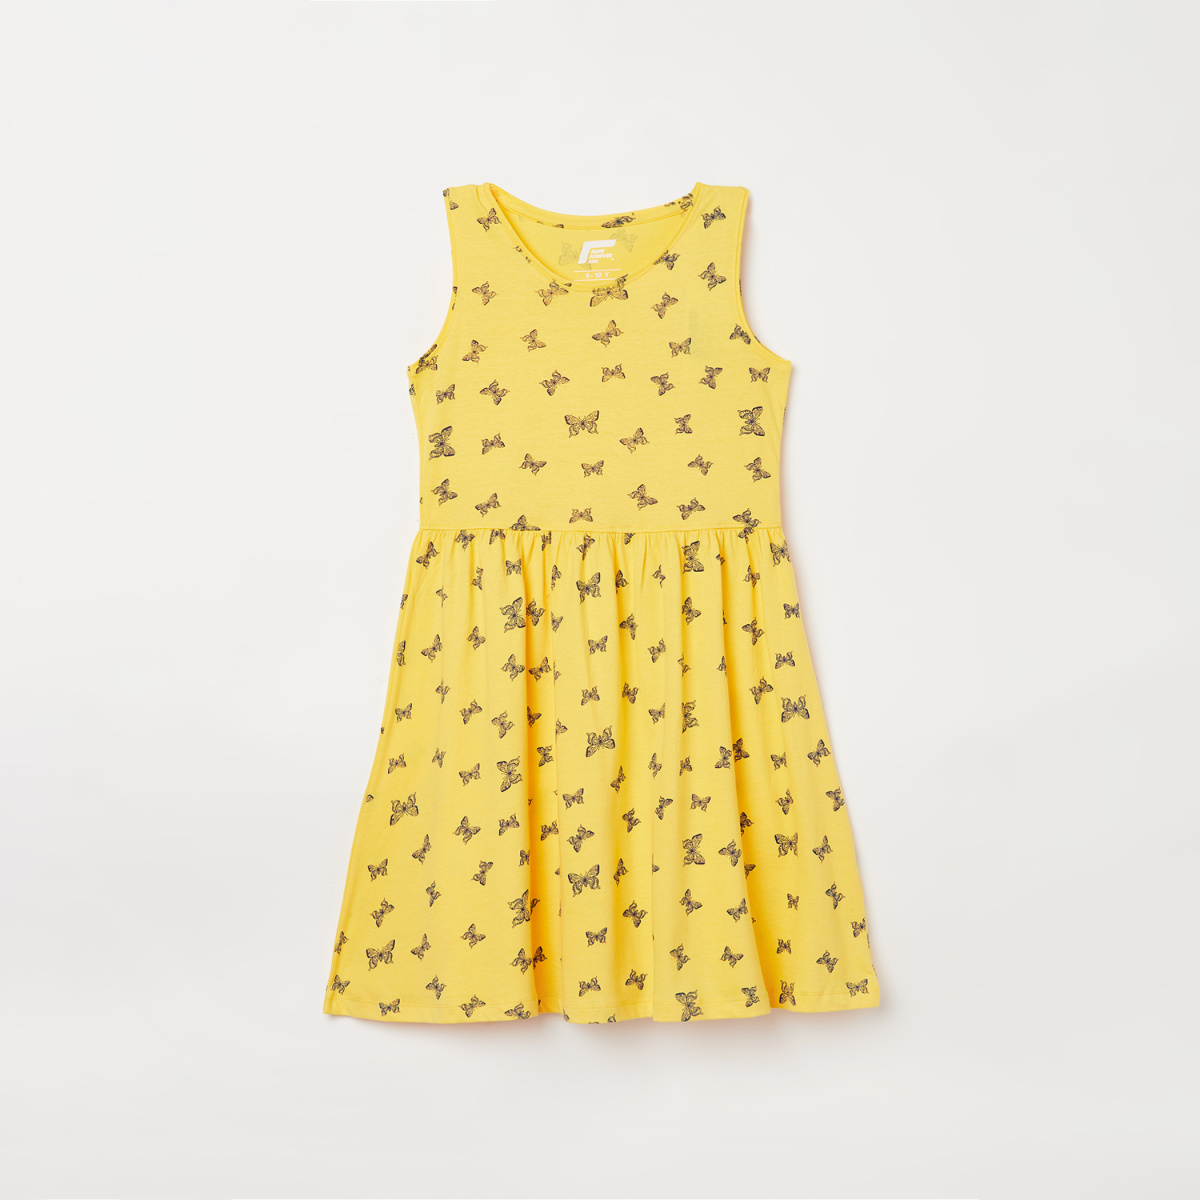 FAME FOREVER YOUNG Girls Printed Sleeveless A-Line Dress